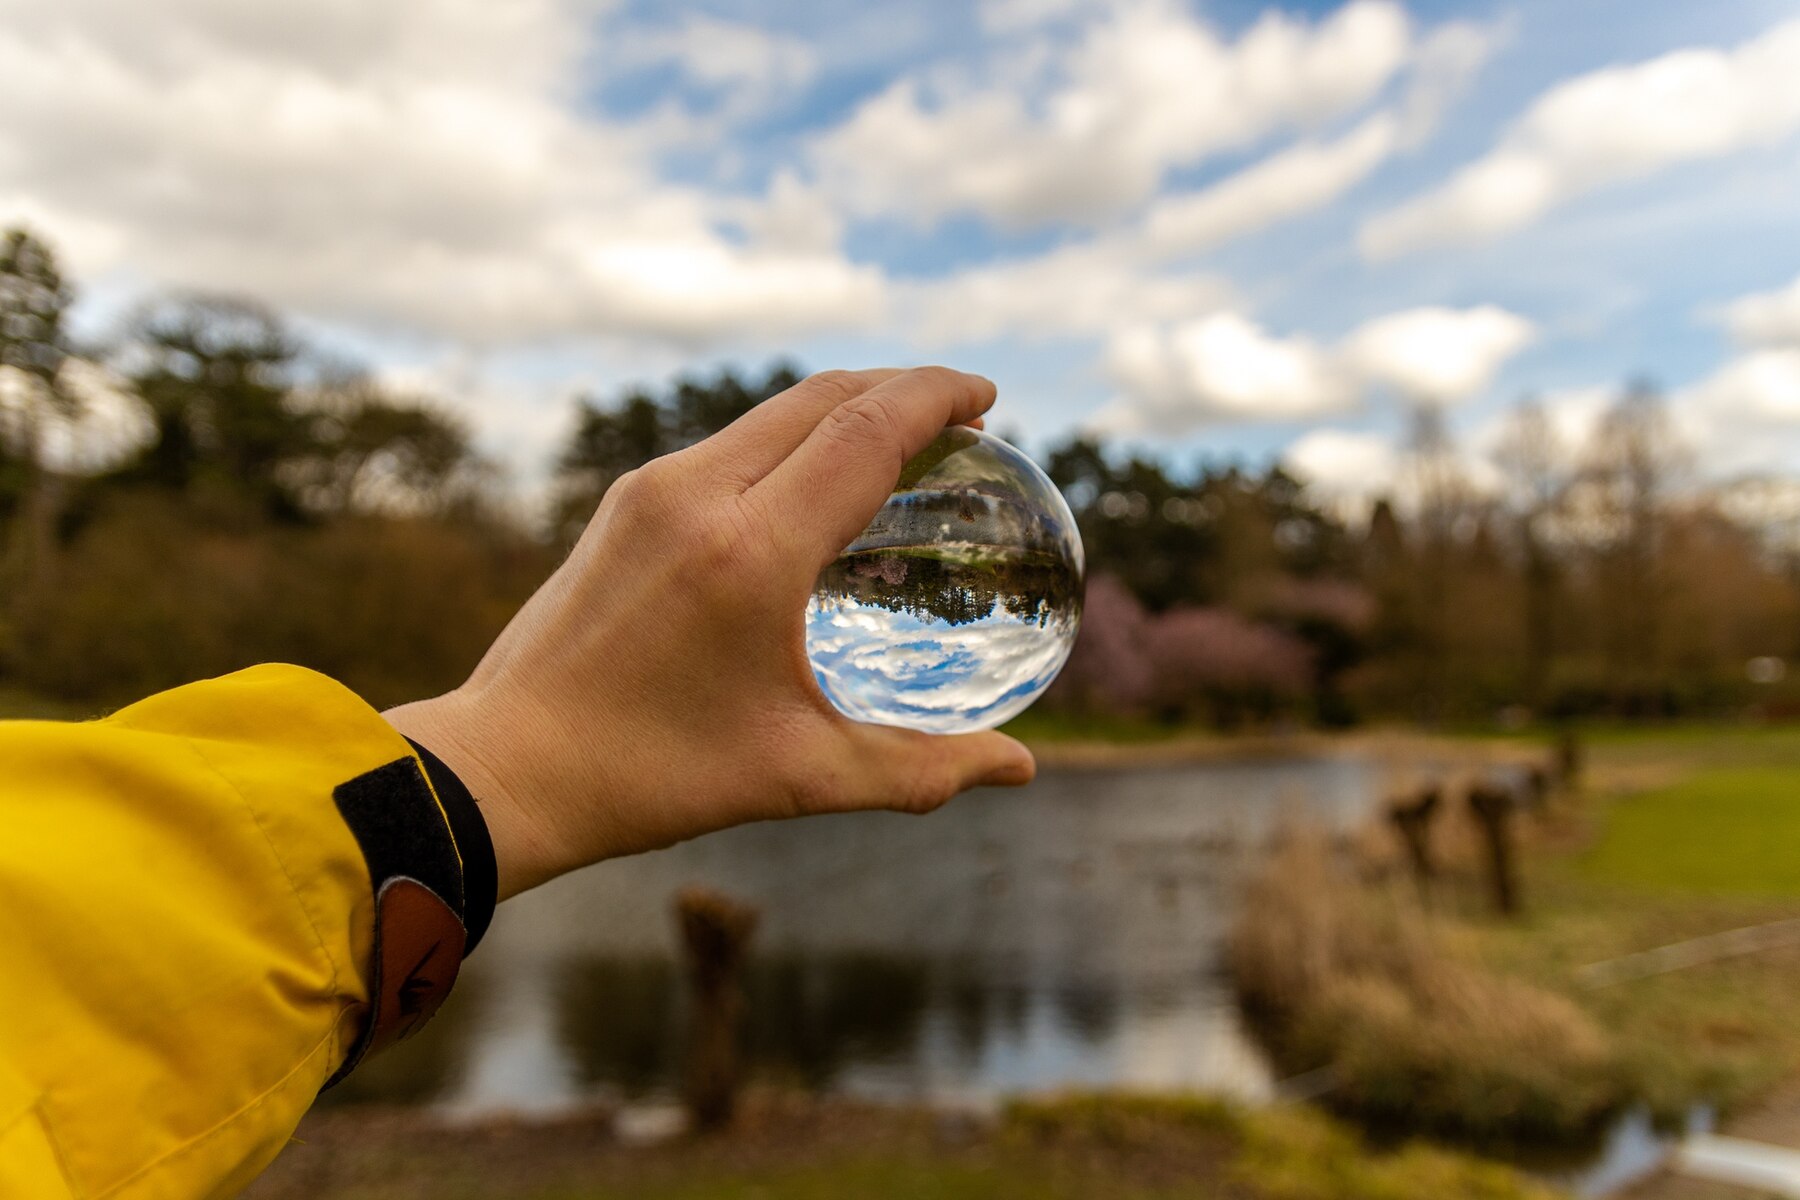 hand-holding-a-glass-sphere-in-the-nature_181624-27204.jpg